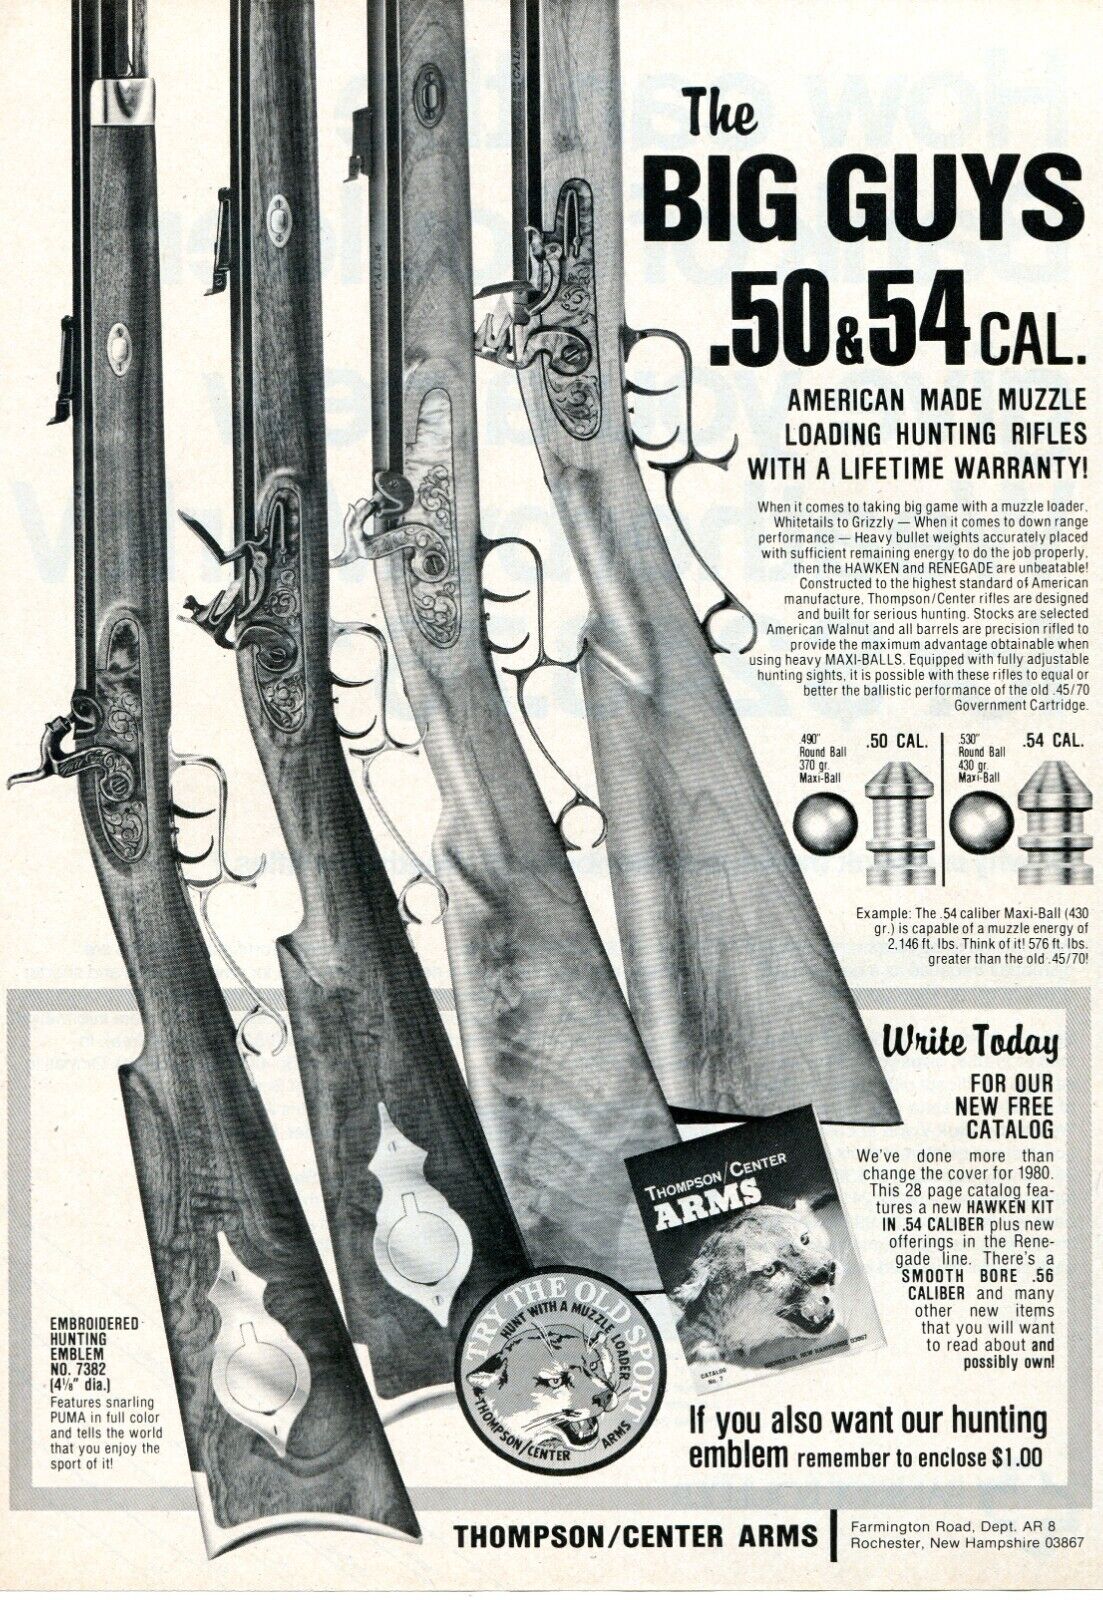 1980 Print Ad of Thompson Center Arms Hawken Renegade Muzzle Loading Rifle